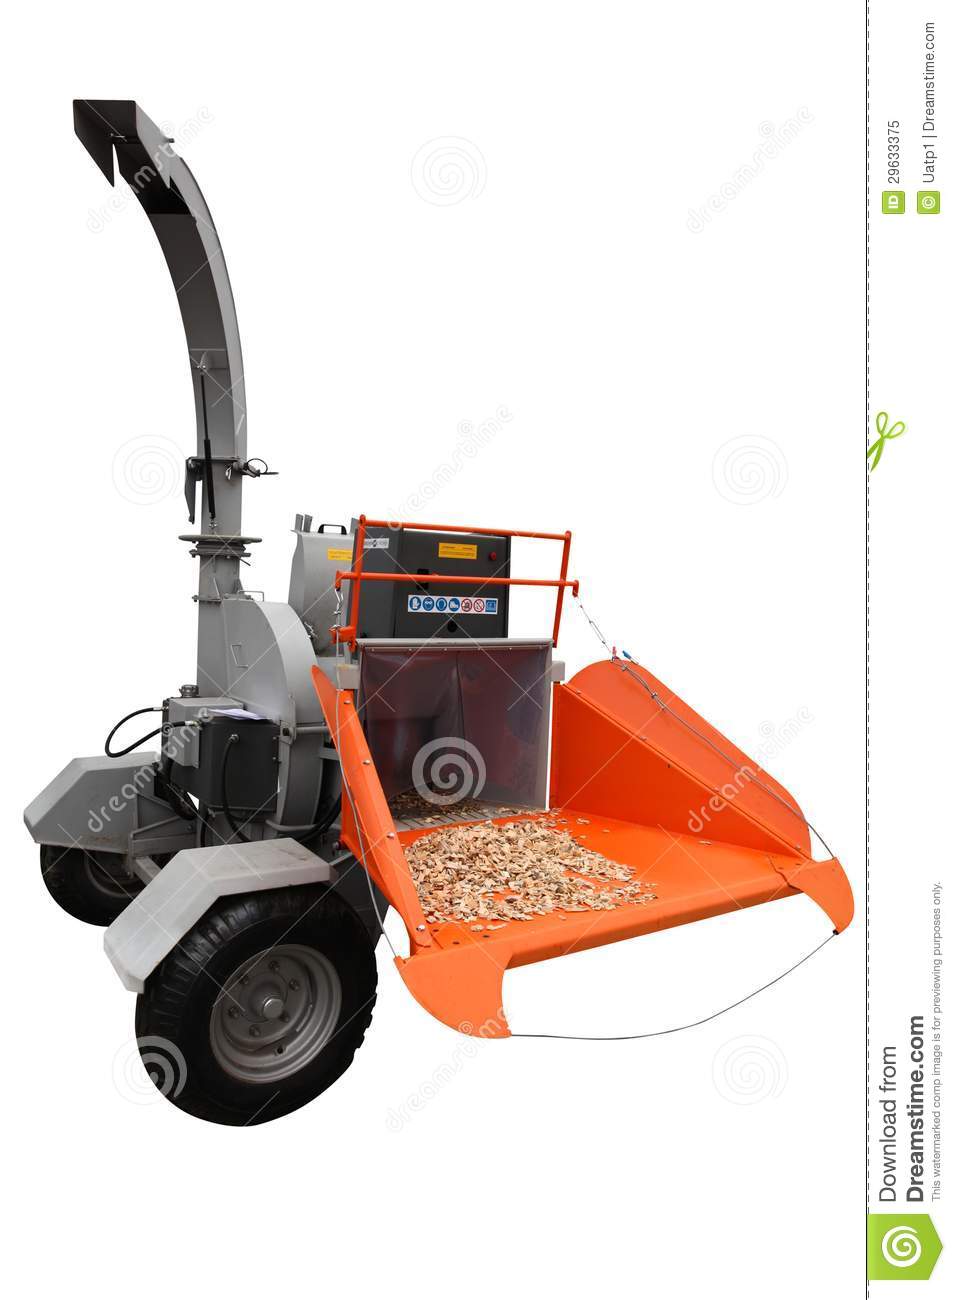 Wood Chipper Royalty Free Stock Photo   Image  29633375